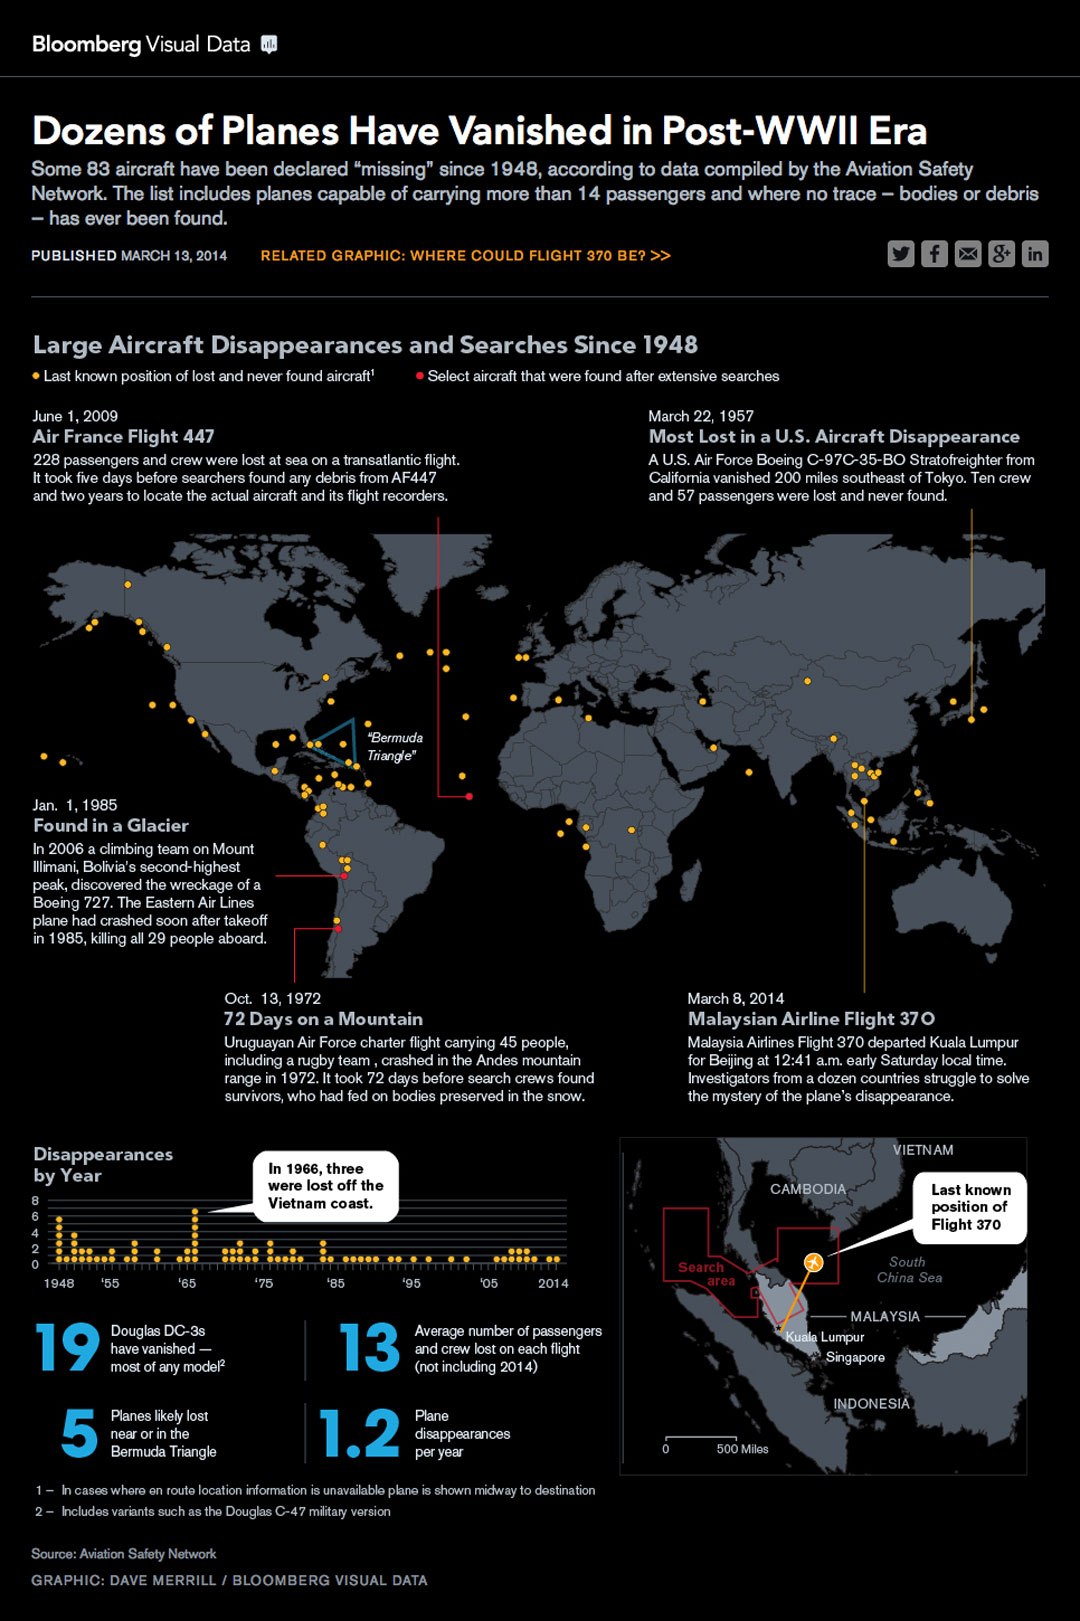 dozens of planes have vanished in post wwii era, missing airplanes, info graphic, bloomberg